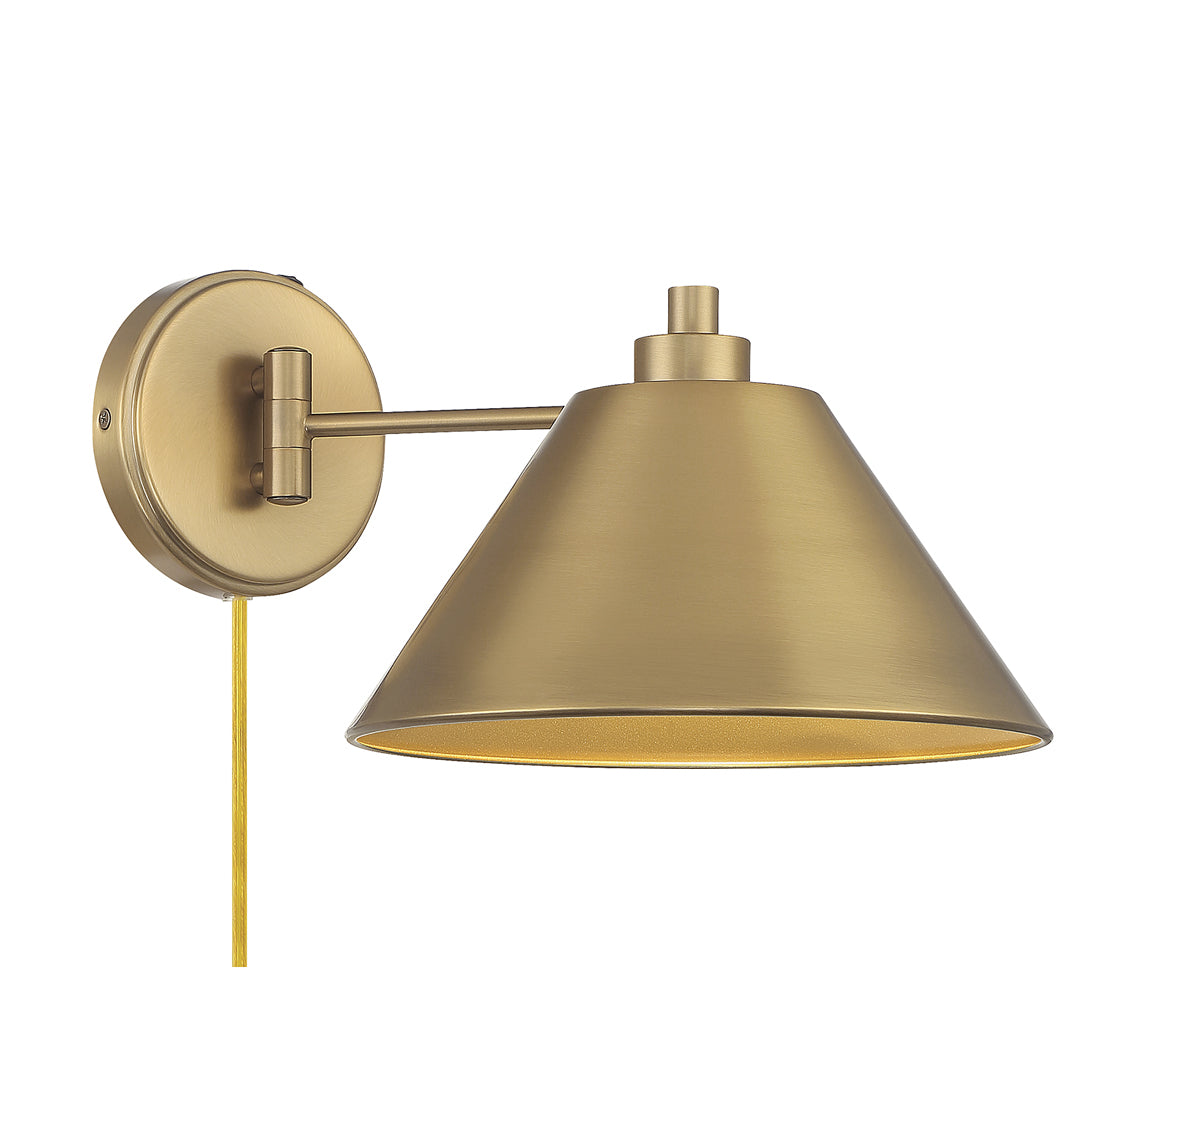 Meridian (M90086NB) 1-Light Wall Sconce in Natural Brass